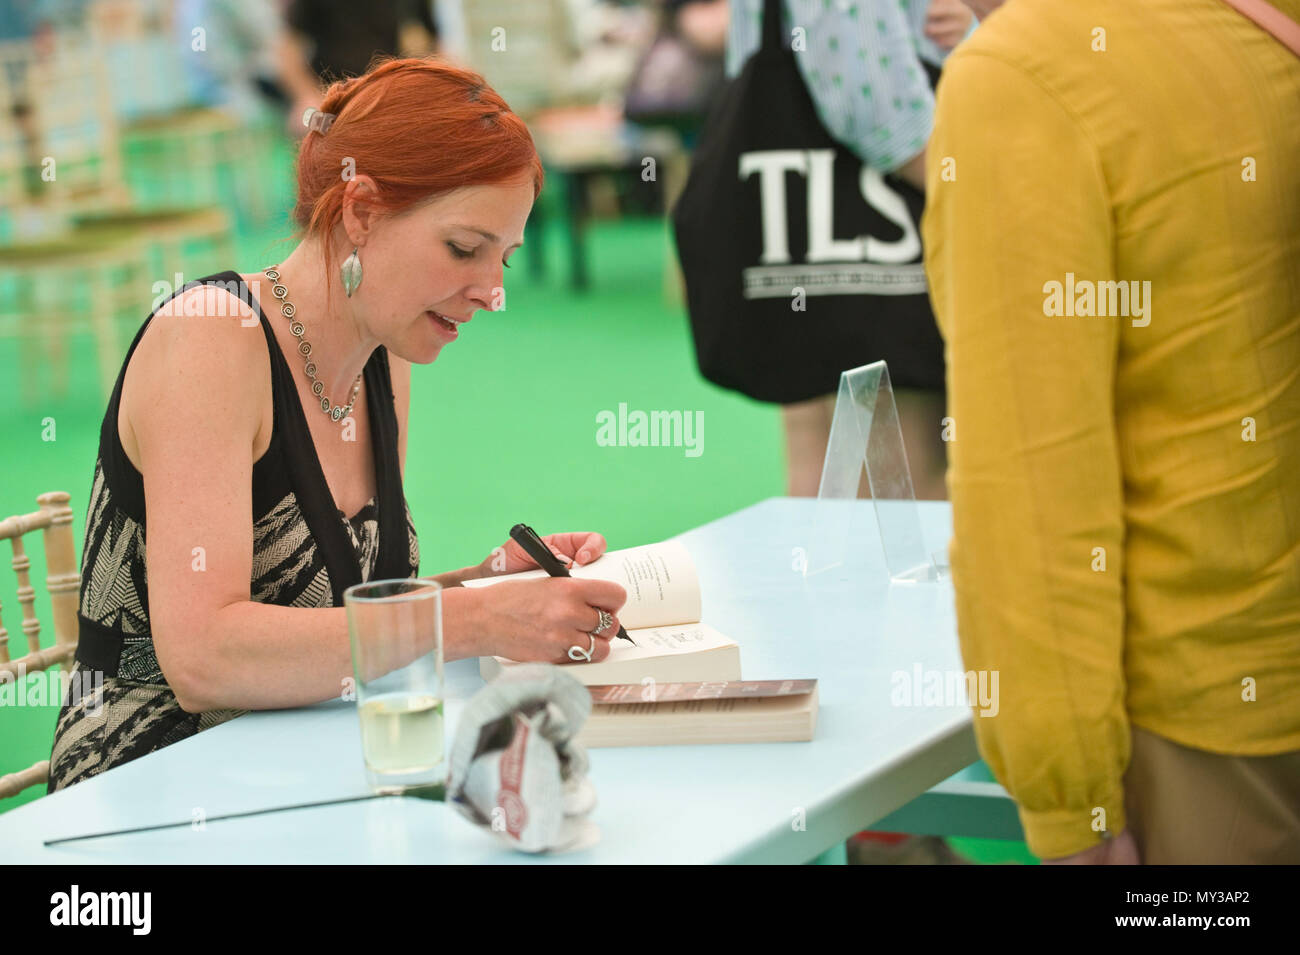 Professor Alice Roberts English anthropologist & television presenter signing books for fans in the bookshop at Hay Festival 2018 Hay-on-Wye Powys Wales UK Stock Photo